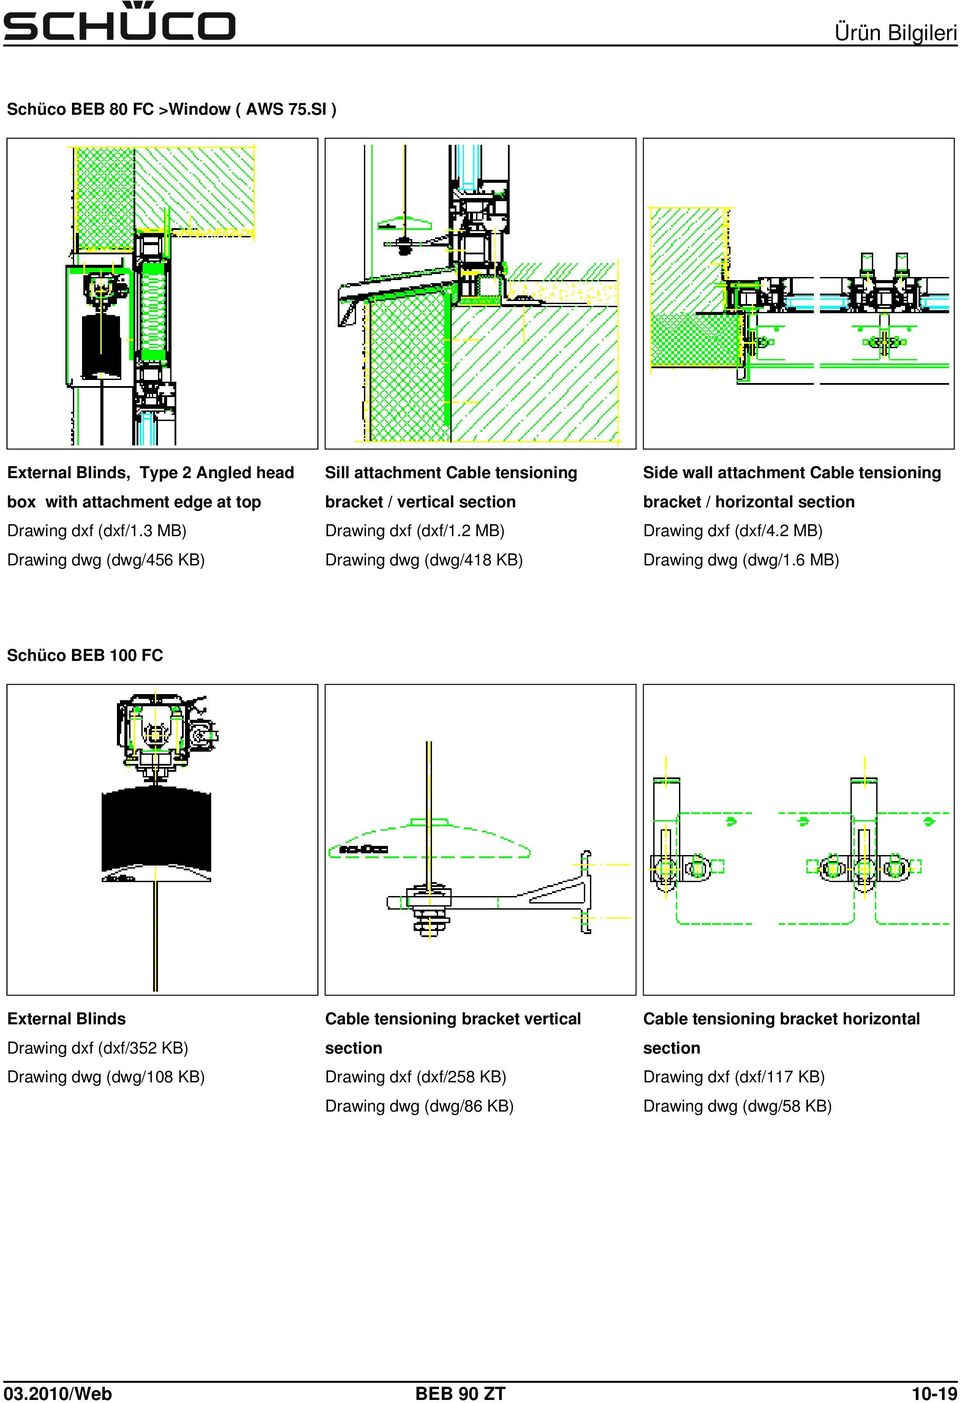 2 MB) Drawing dwg (dwg/418 KB) Side wall attachment Cable tensioning bracket / horizontal Drawing dxf (dxf/4.2 MB) Drawing dwg (dwg/1.